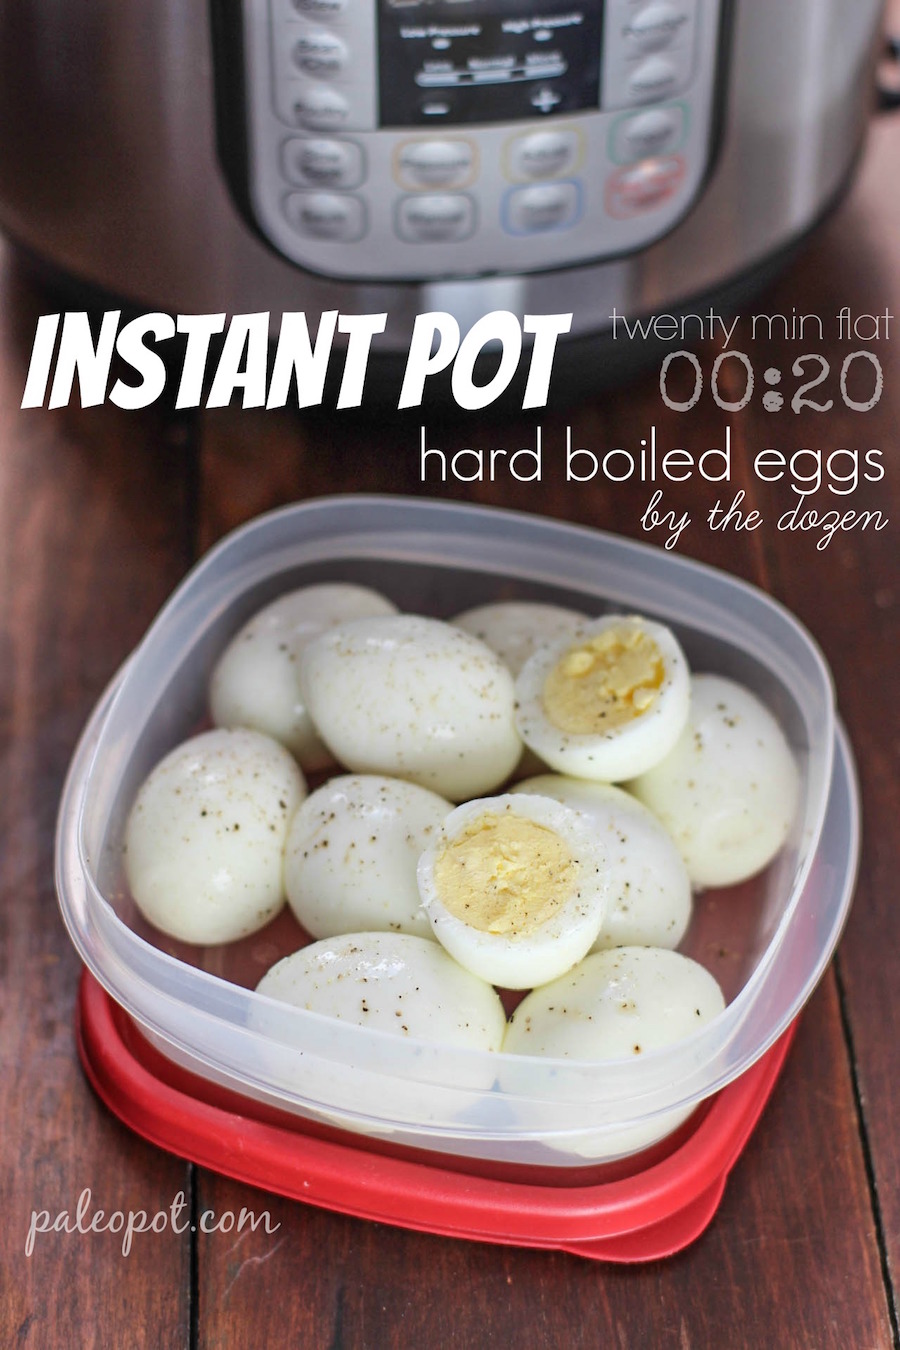 instant_pot_hard_boiled_eggs_graphic_2_900w